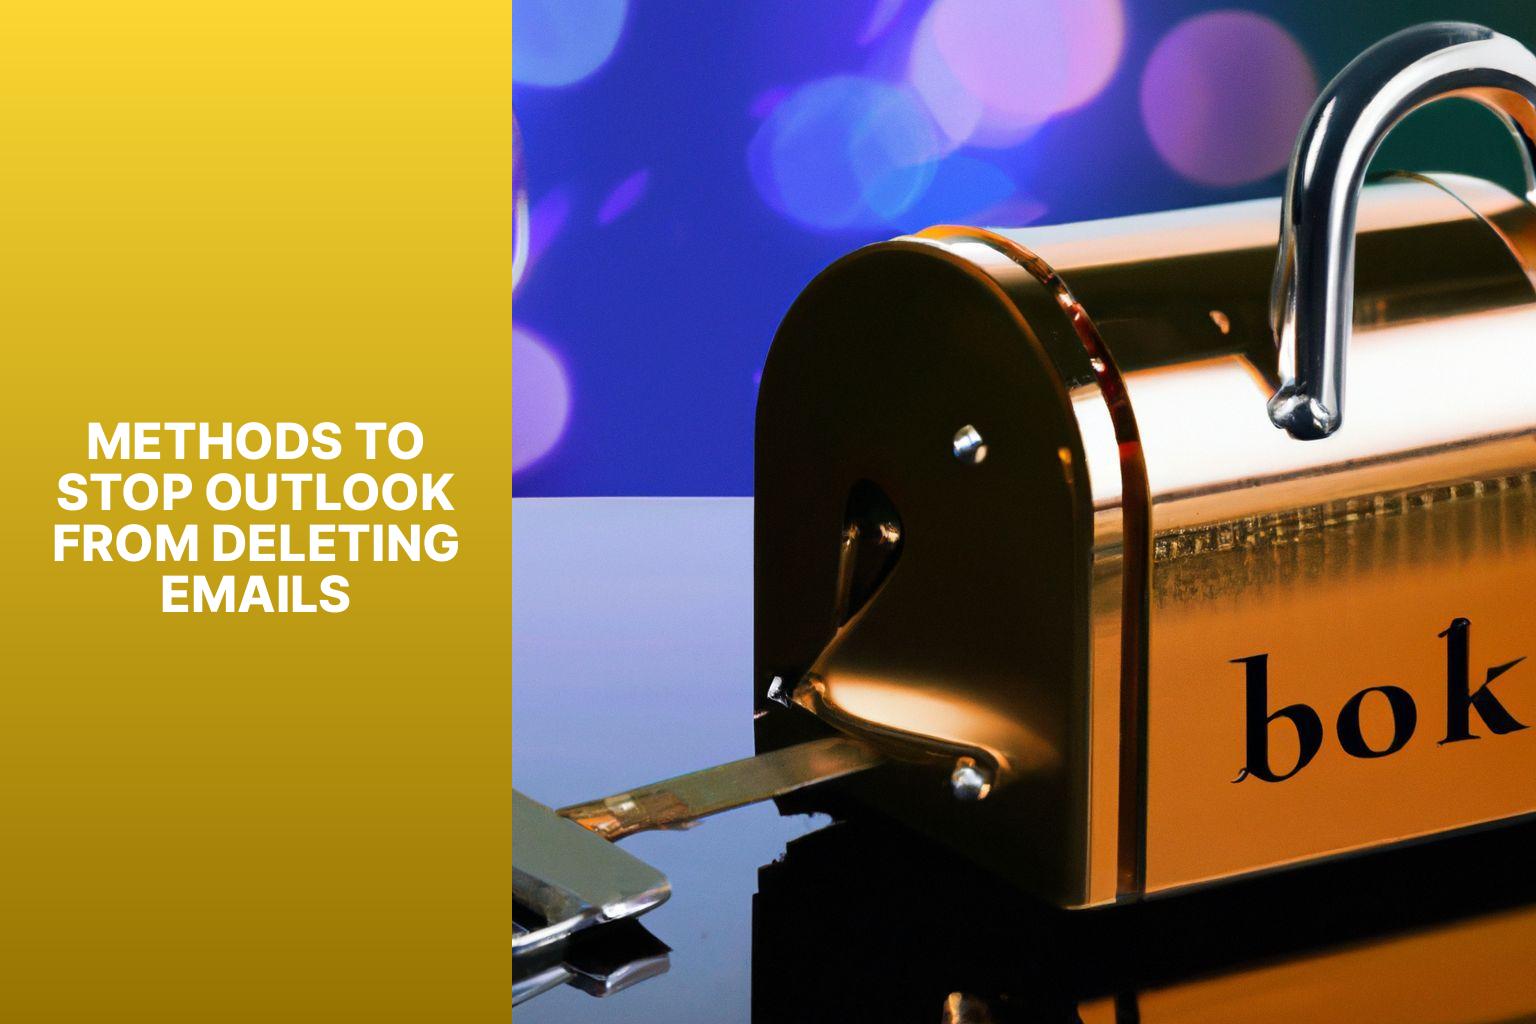 Methods to Stop Outlook from Deleting Emails - how to stop outlook from deleting emails 